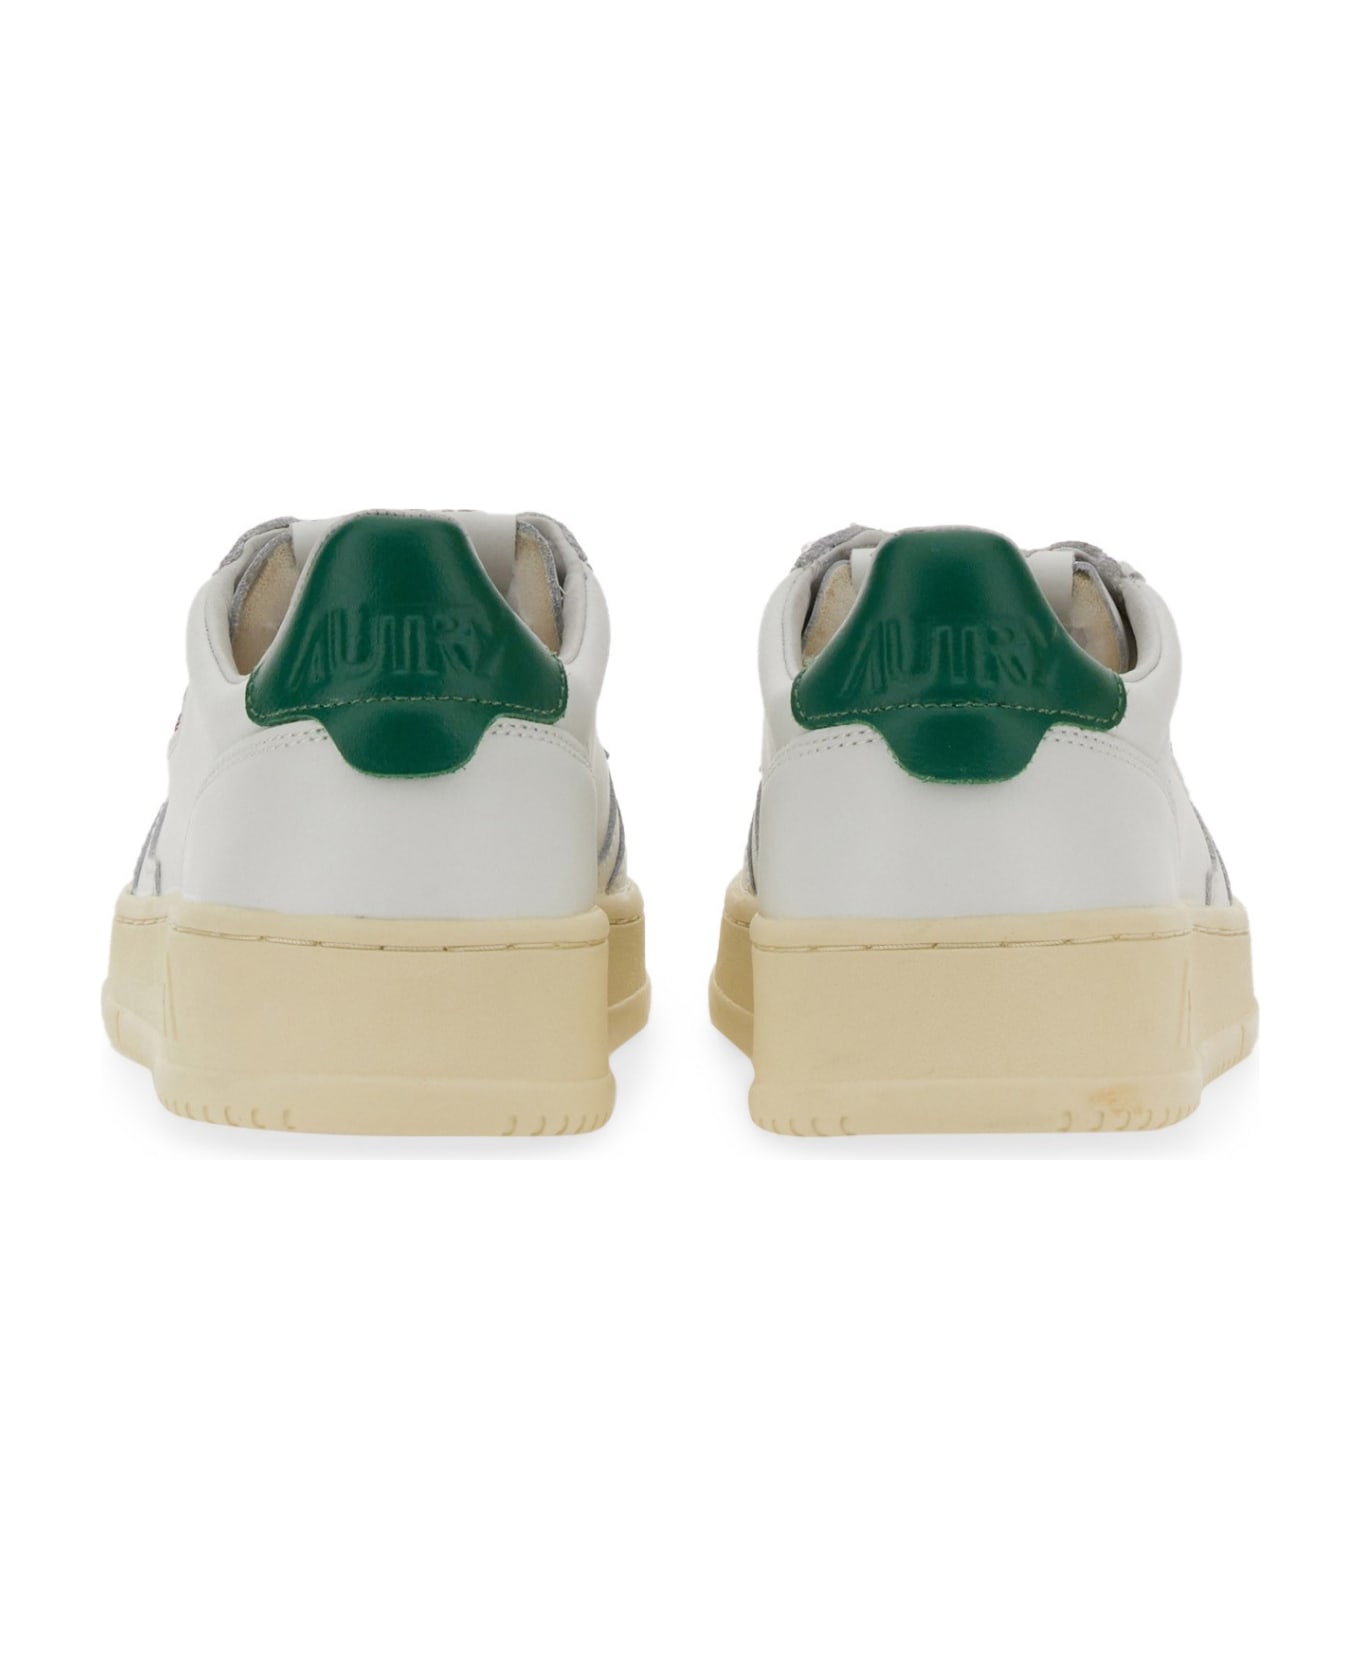 Autry Medalist Low Sneakers - White/green